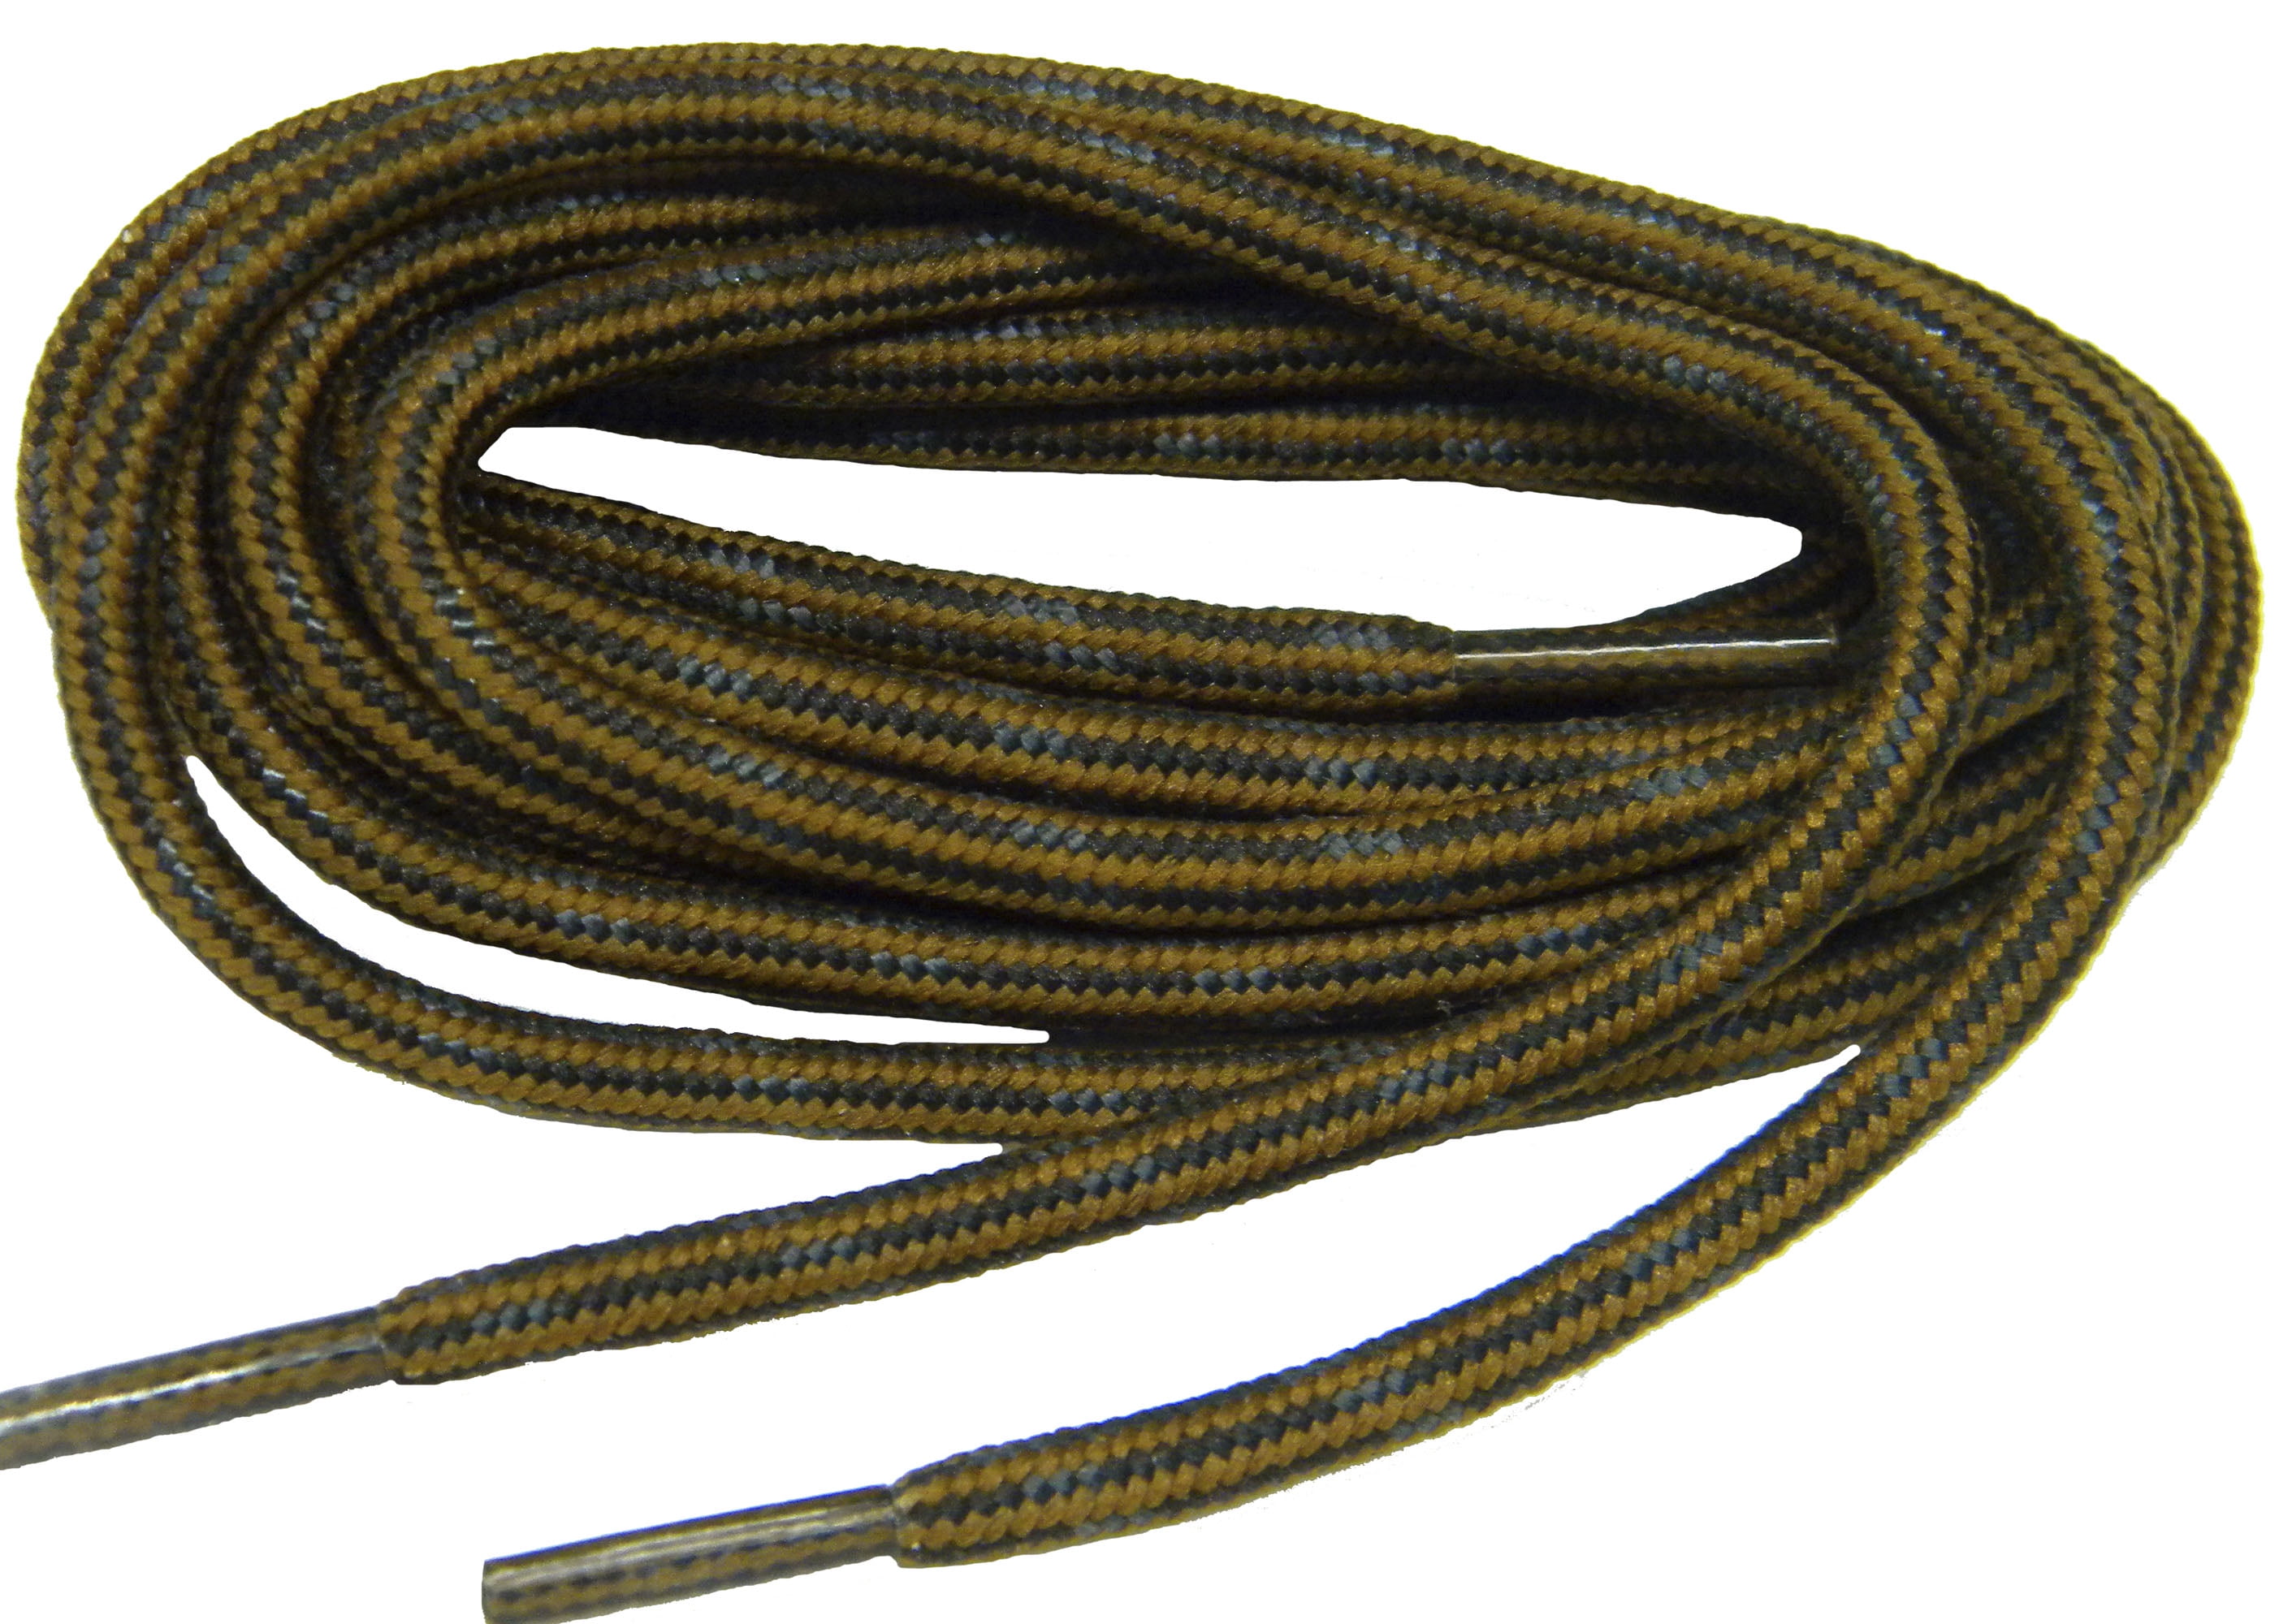 1 pair Dark Grey w/ Yellow Heavy 7/32 thick shoelaces made with Kevlar strands 